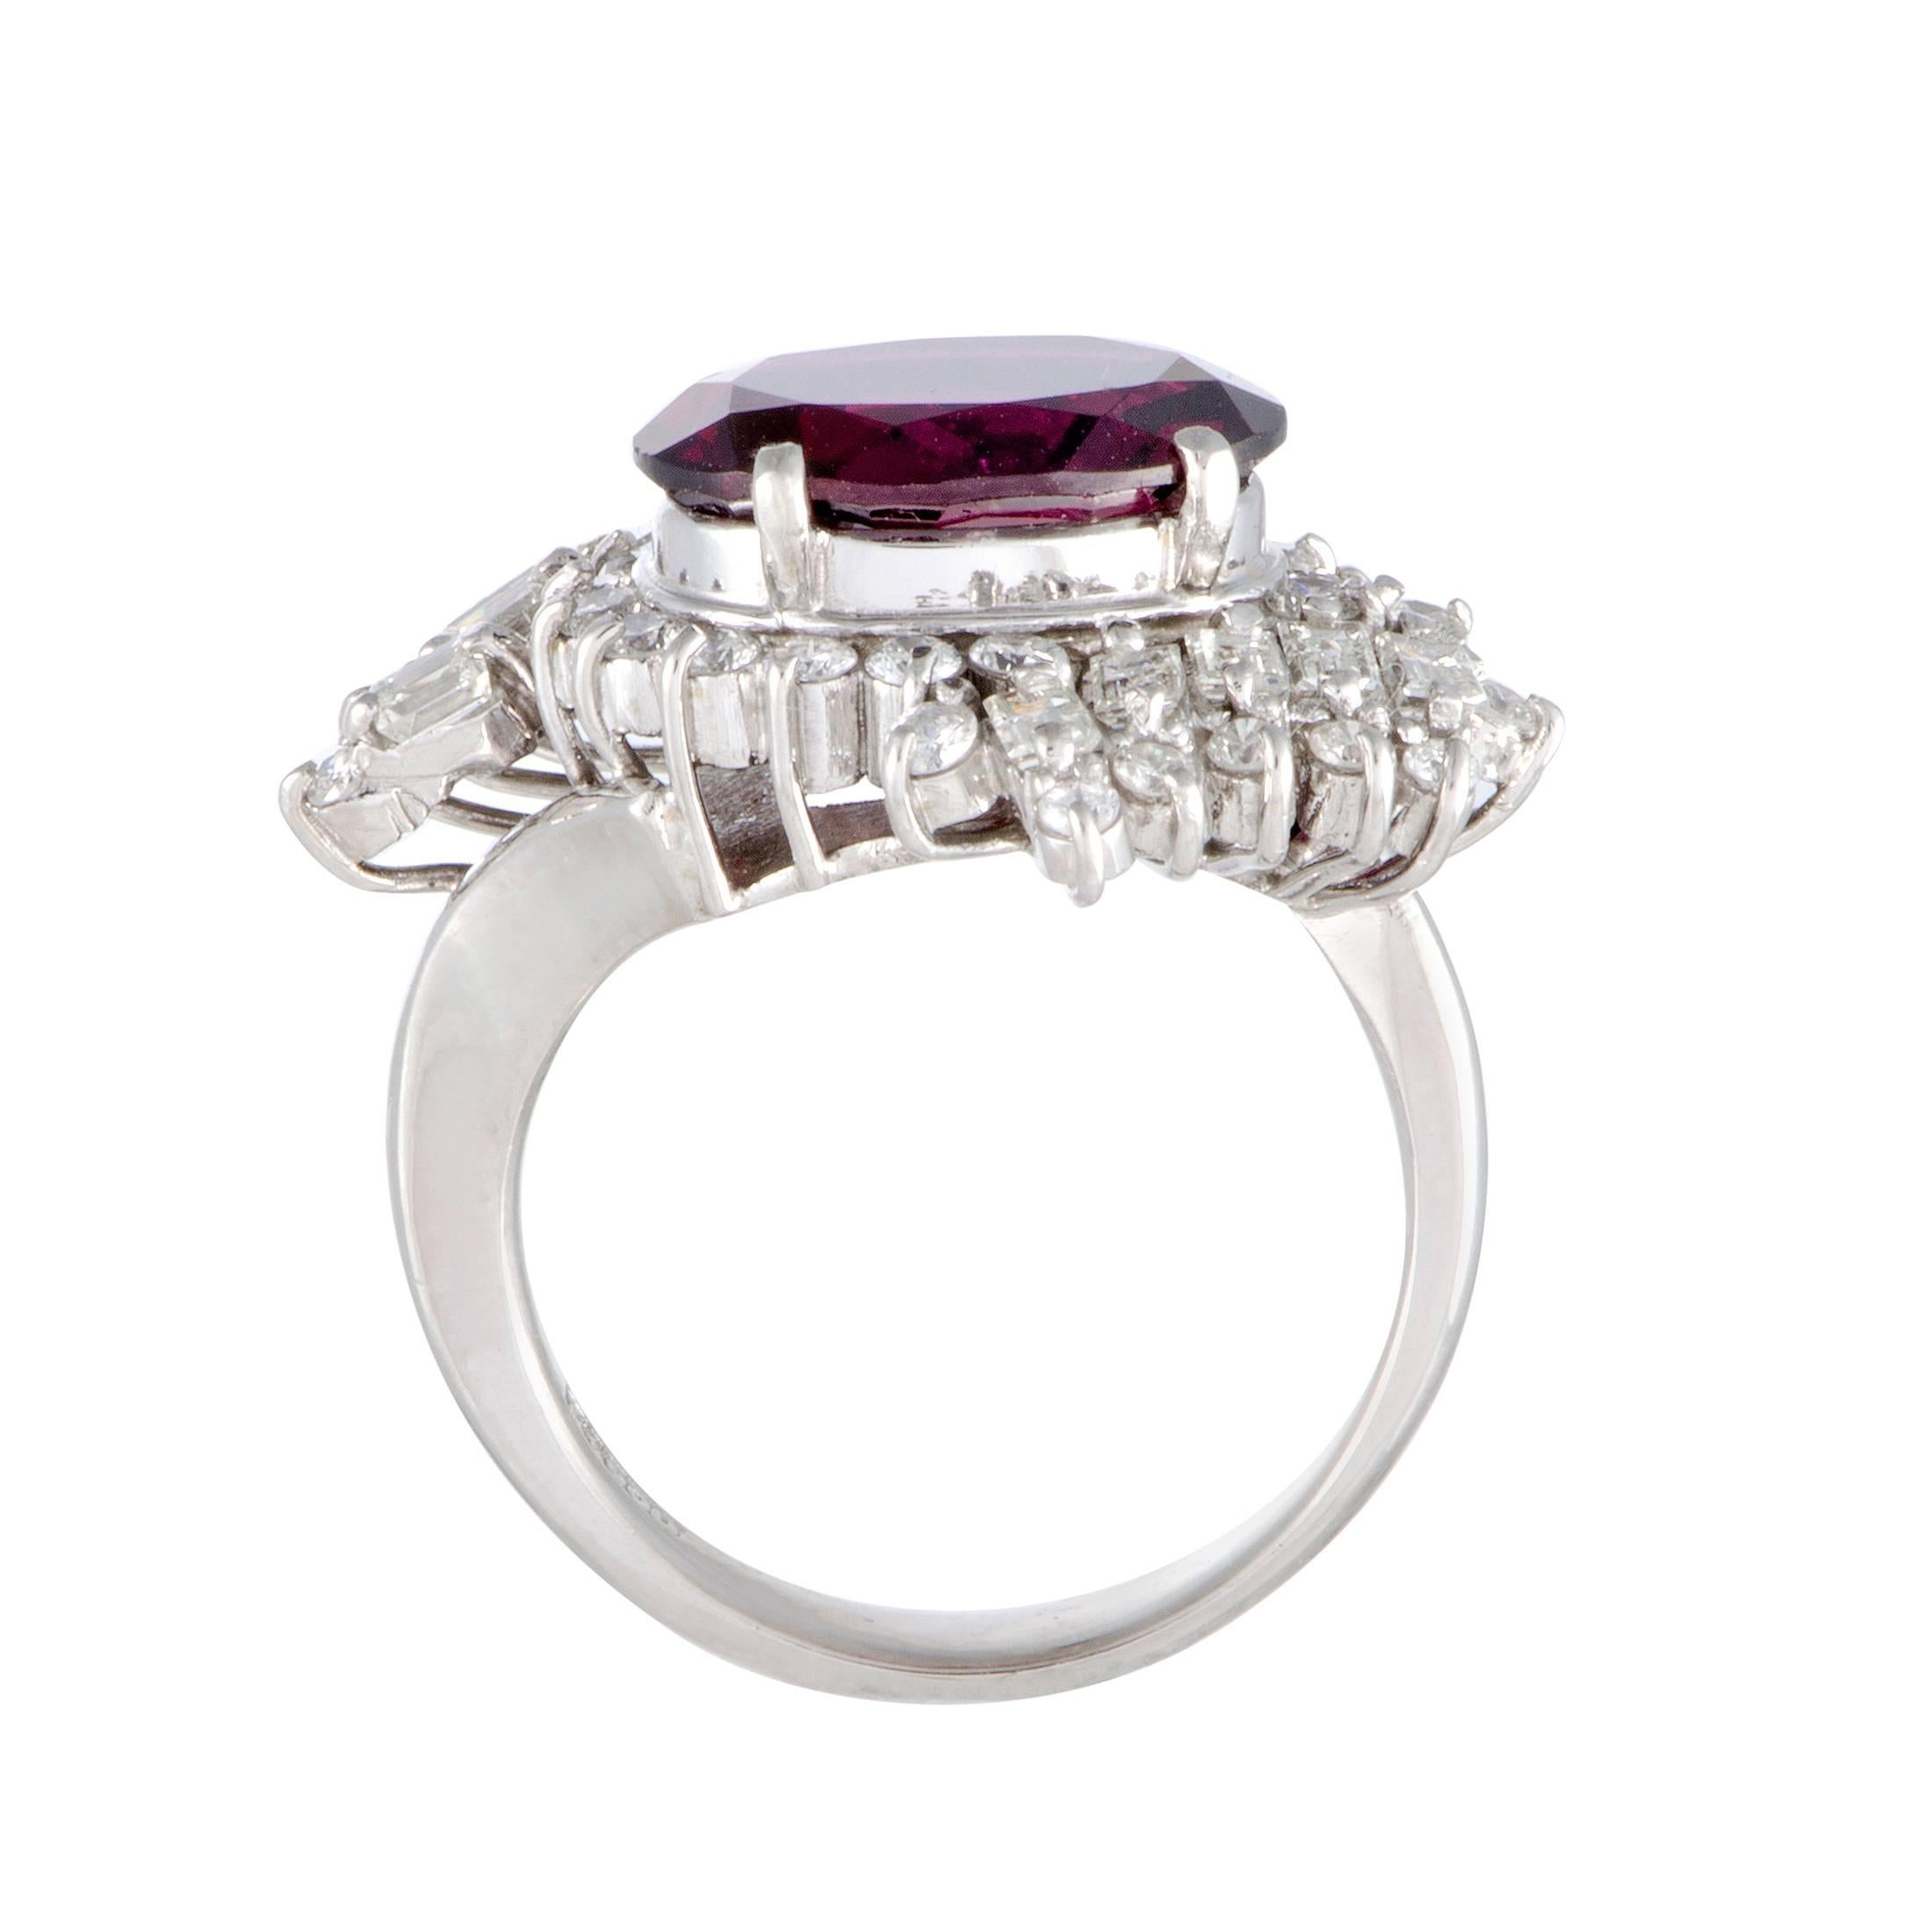 The captivating nuance of tourmaline stands out in magnificent fashion against the luxuriously bright tones of resplendent diamonds and gleaming platinum in this stunning ring. The tourmaline weighs 4.67 carats and the diamond stones total 0.94